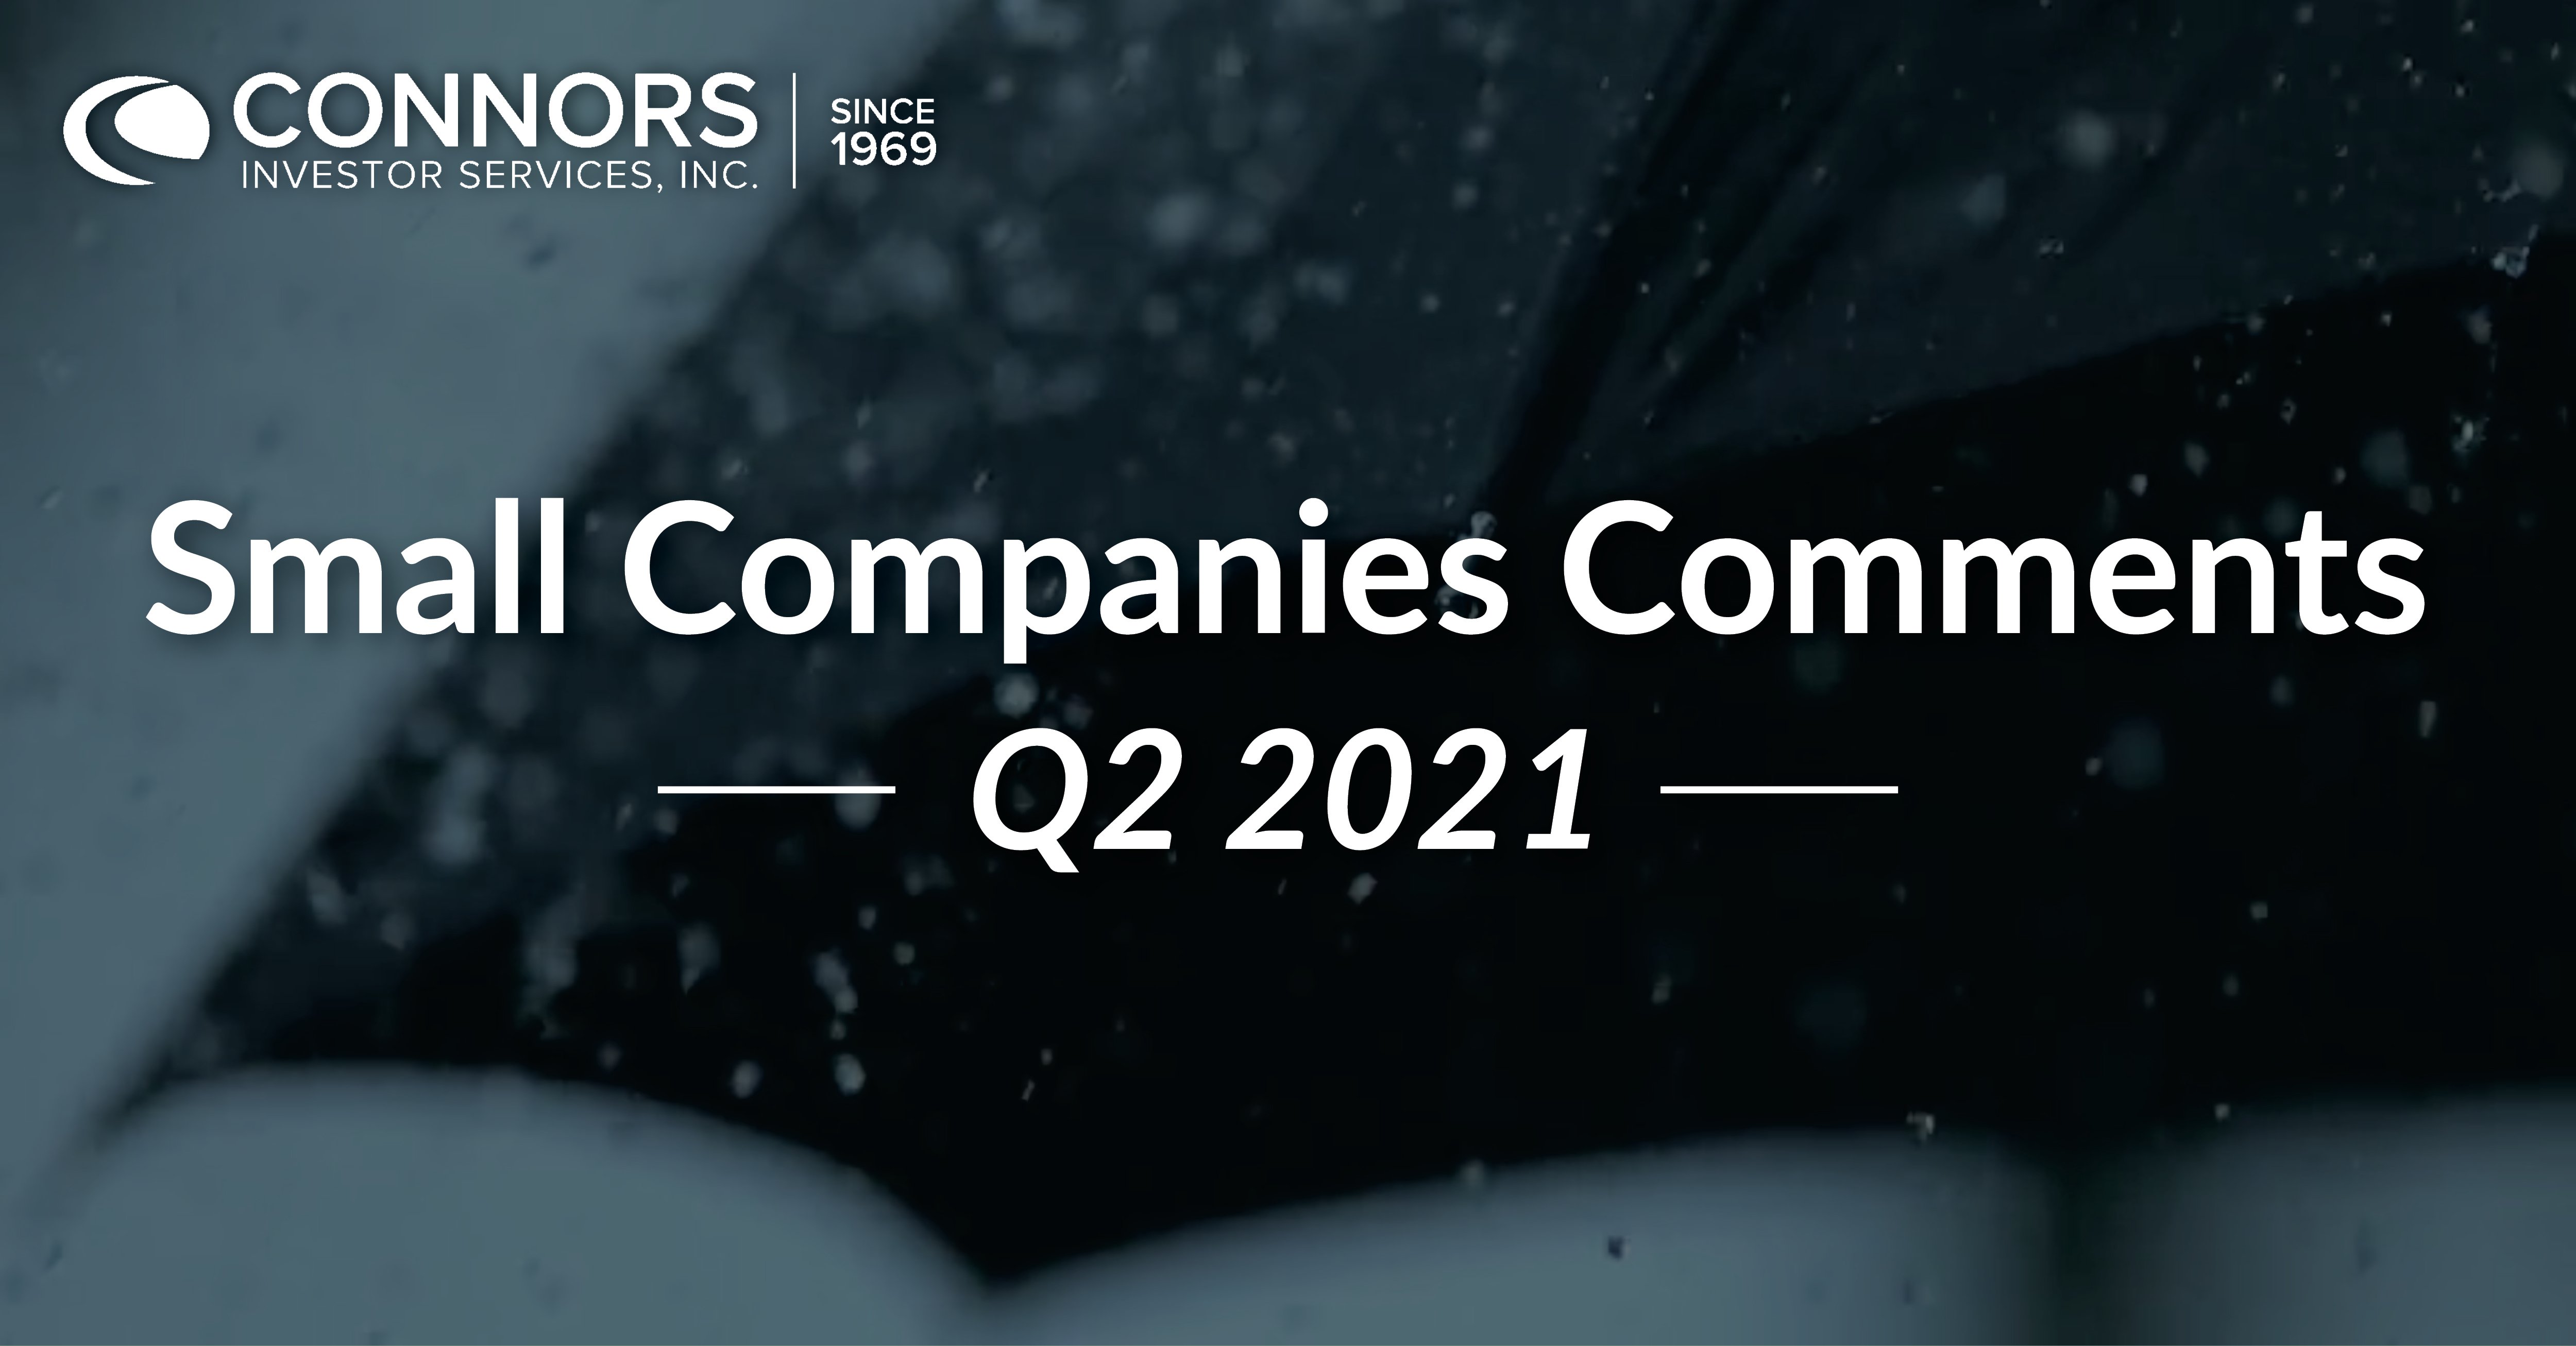 Q2 2021 Small Companies Comments